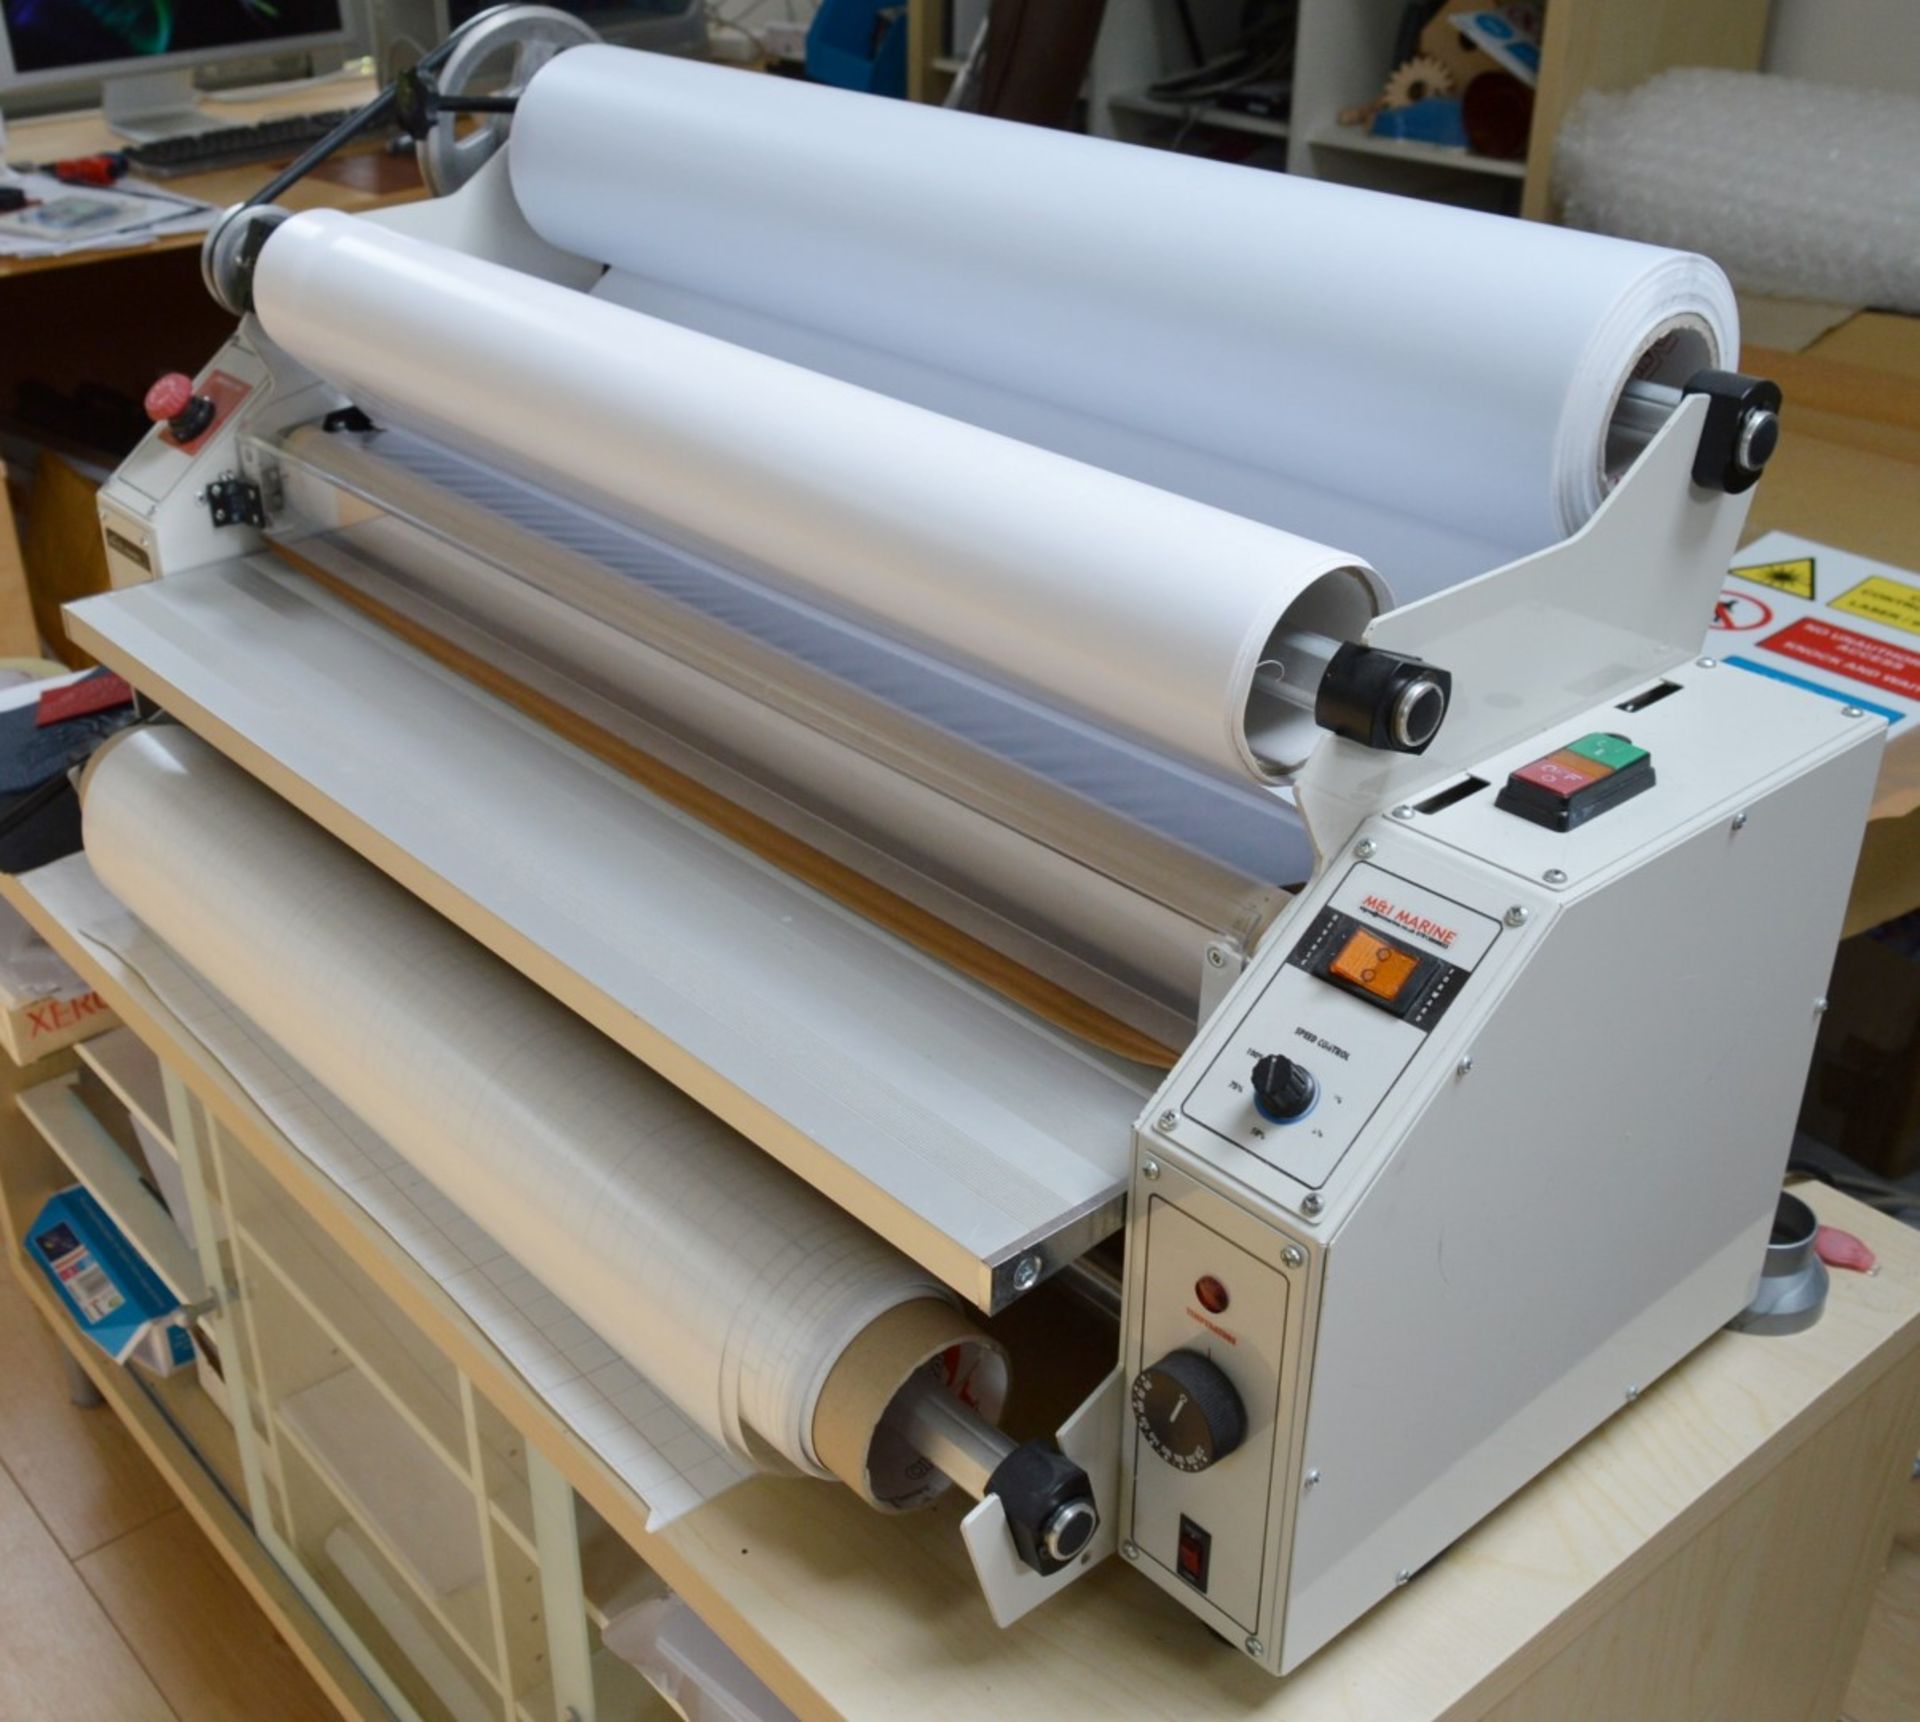 1 x Xativa Emseal Type 810 Thermal Roll Laminator - 240v - Professional Desk Mounted Laminator With